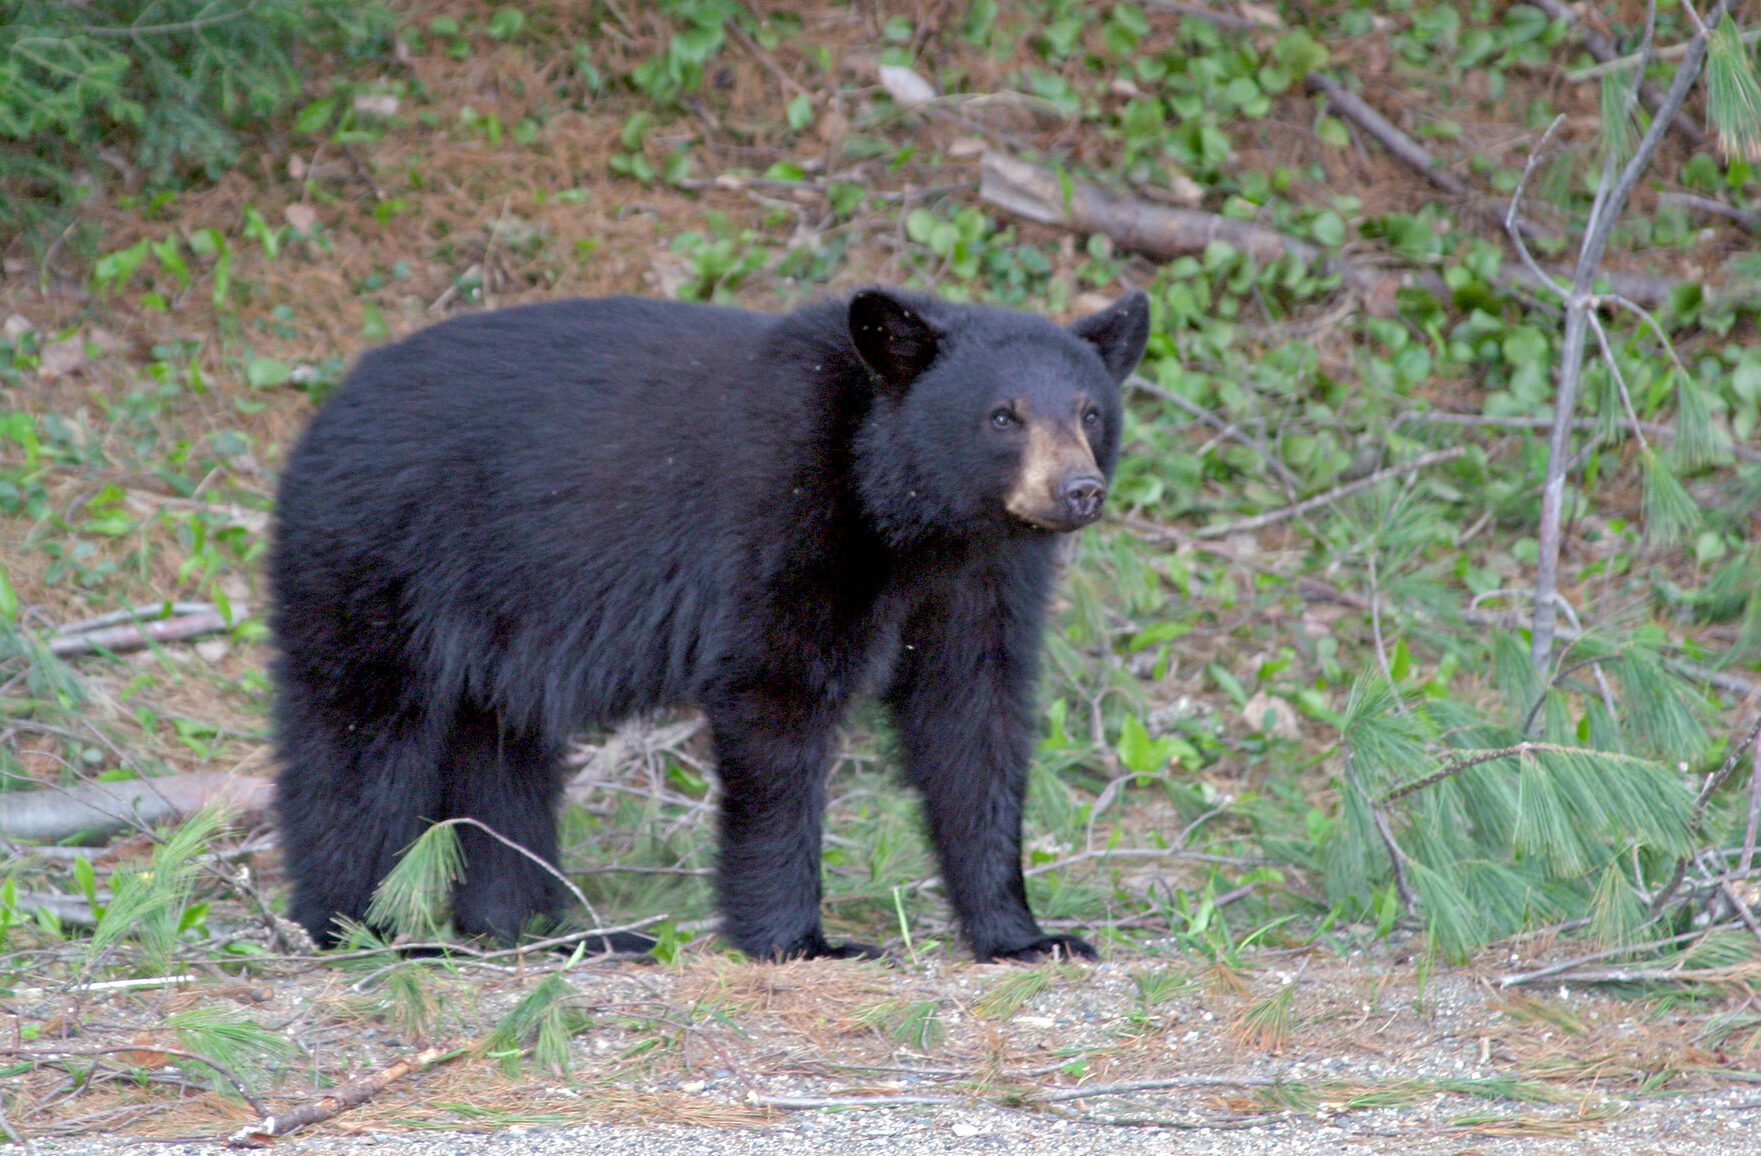 New Jersey Woman Attacked by a Young Black Bear, Just 50 Miles from NYC